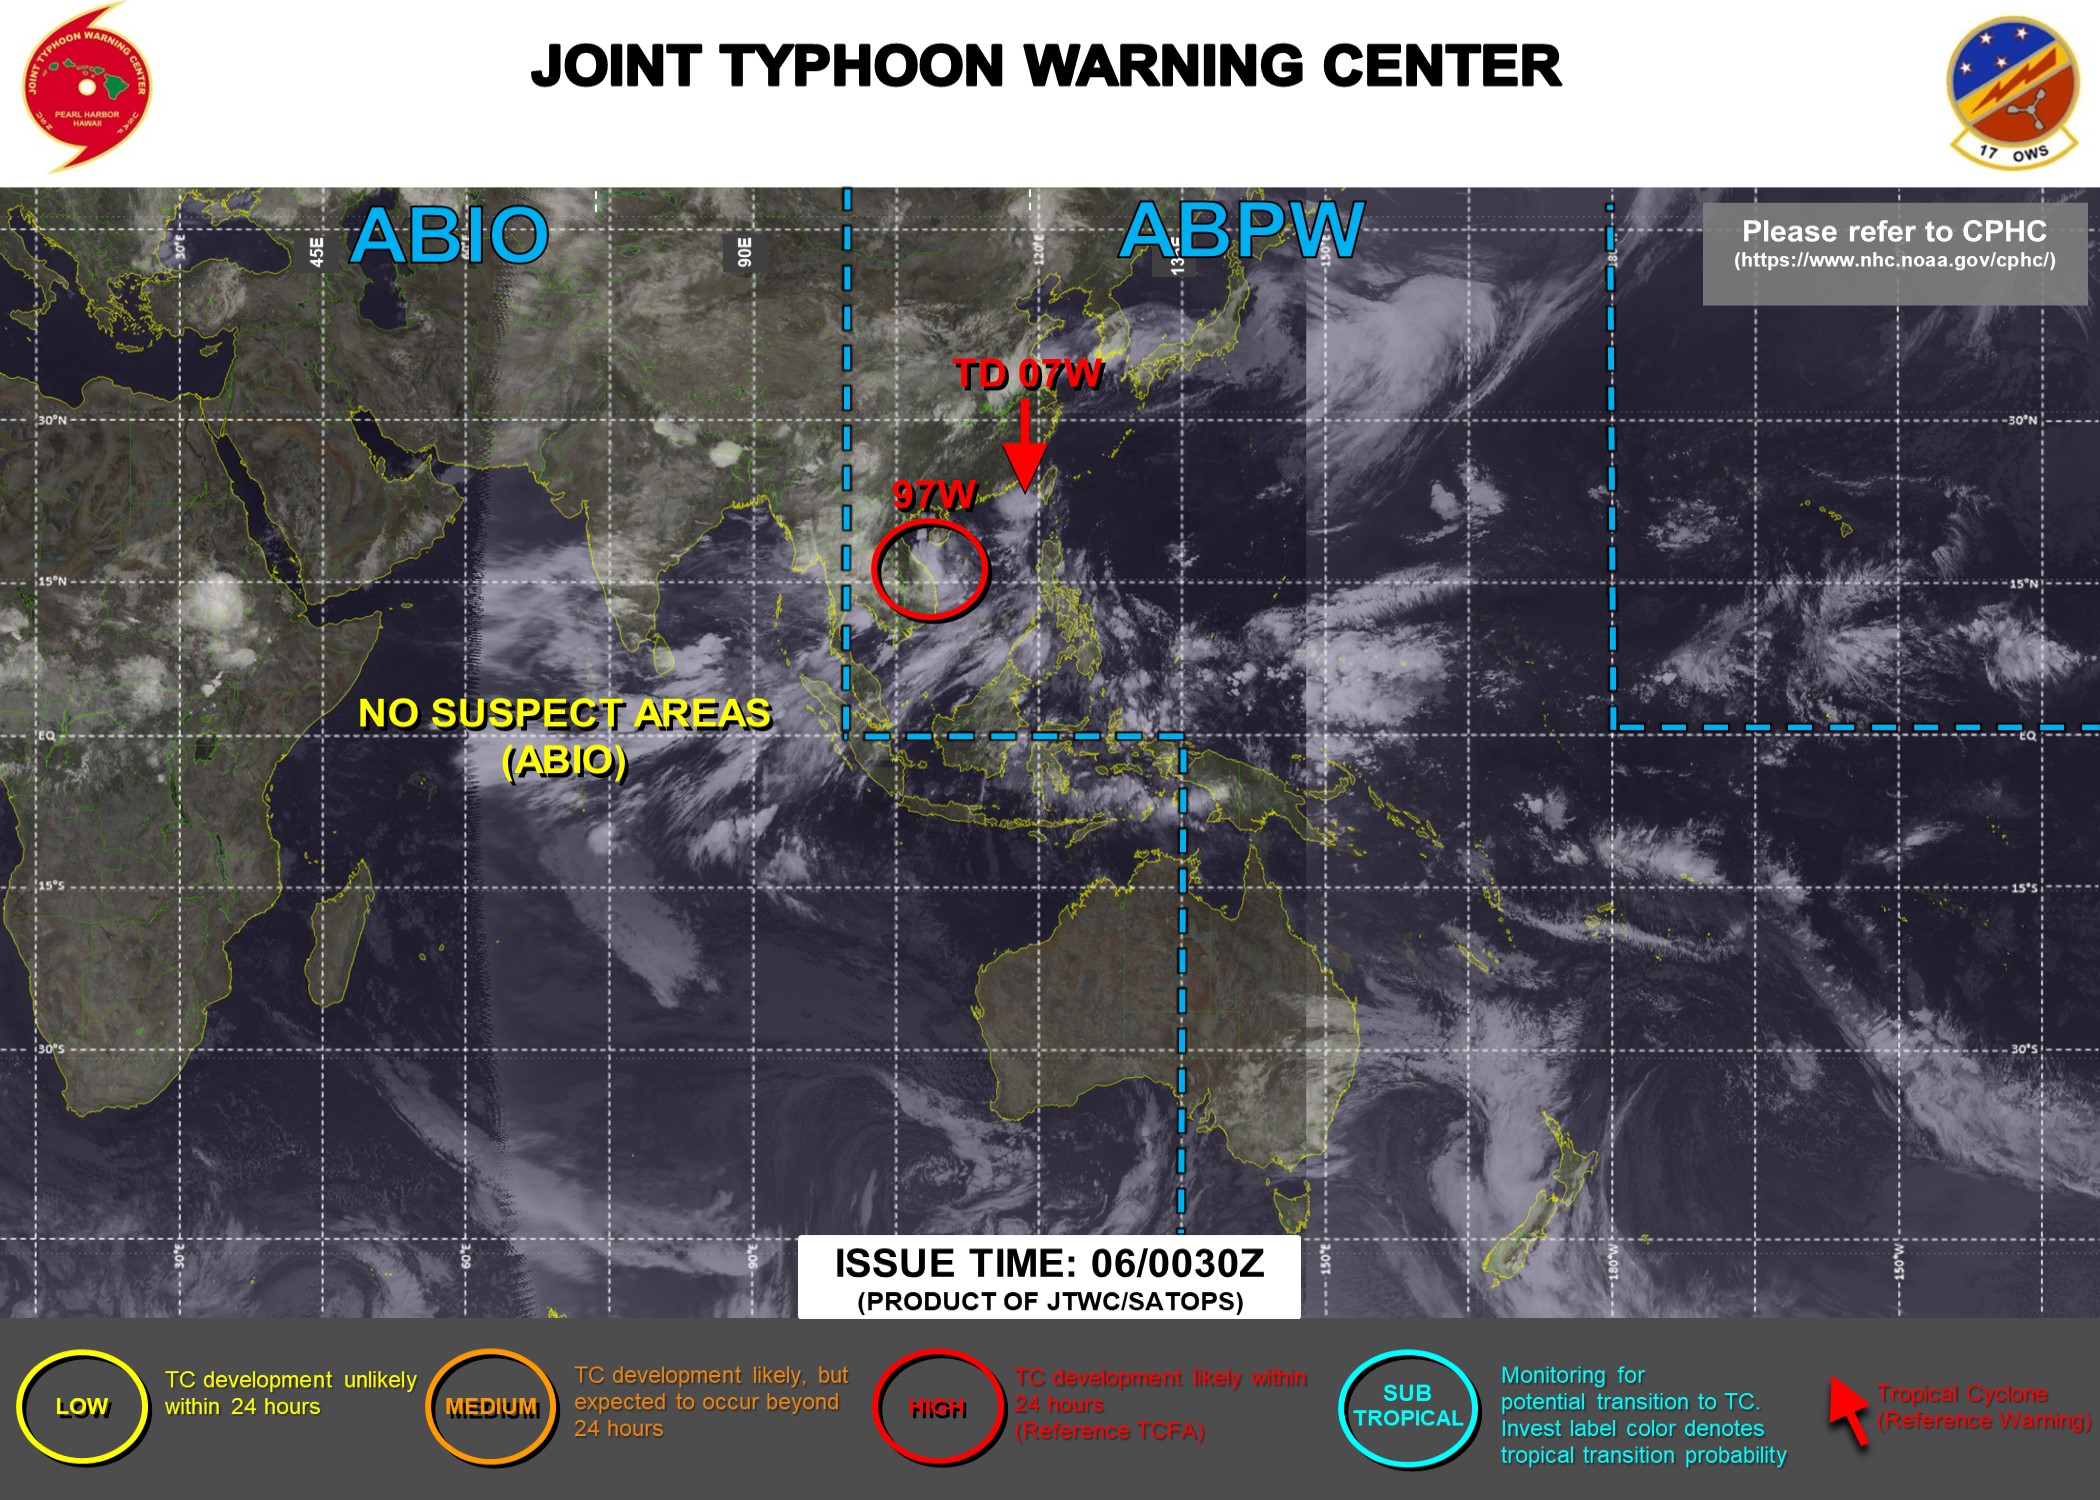 JTWC IS ISSUING THE FINAL WARNING AT 06/03UTC ON 07W. 3HOURLY SATELLITE BULLETINS ARE STILL ISSUED. INVEST 97W IS UP-GRADED TO HIGH: HIGH CHANCES OF DEVELOPING 25KNOT WINDS NEAR ITS CENTER WITHIN 24HOURS. 3 HOURLY SATELLITE BULLETINS ARE ISSUED ON 97W.